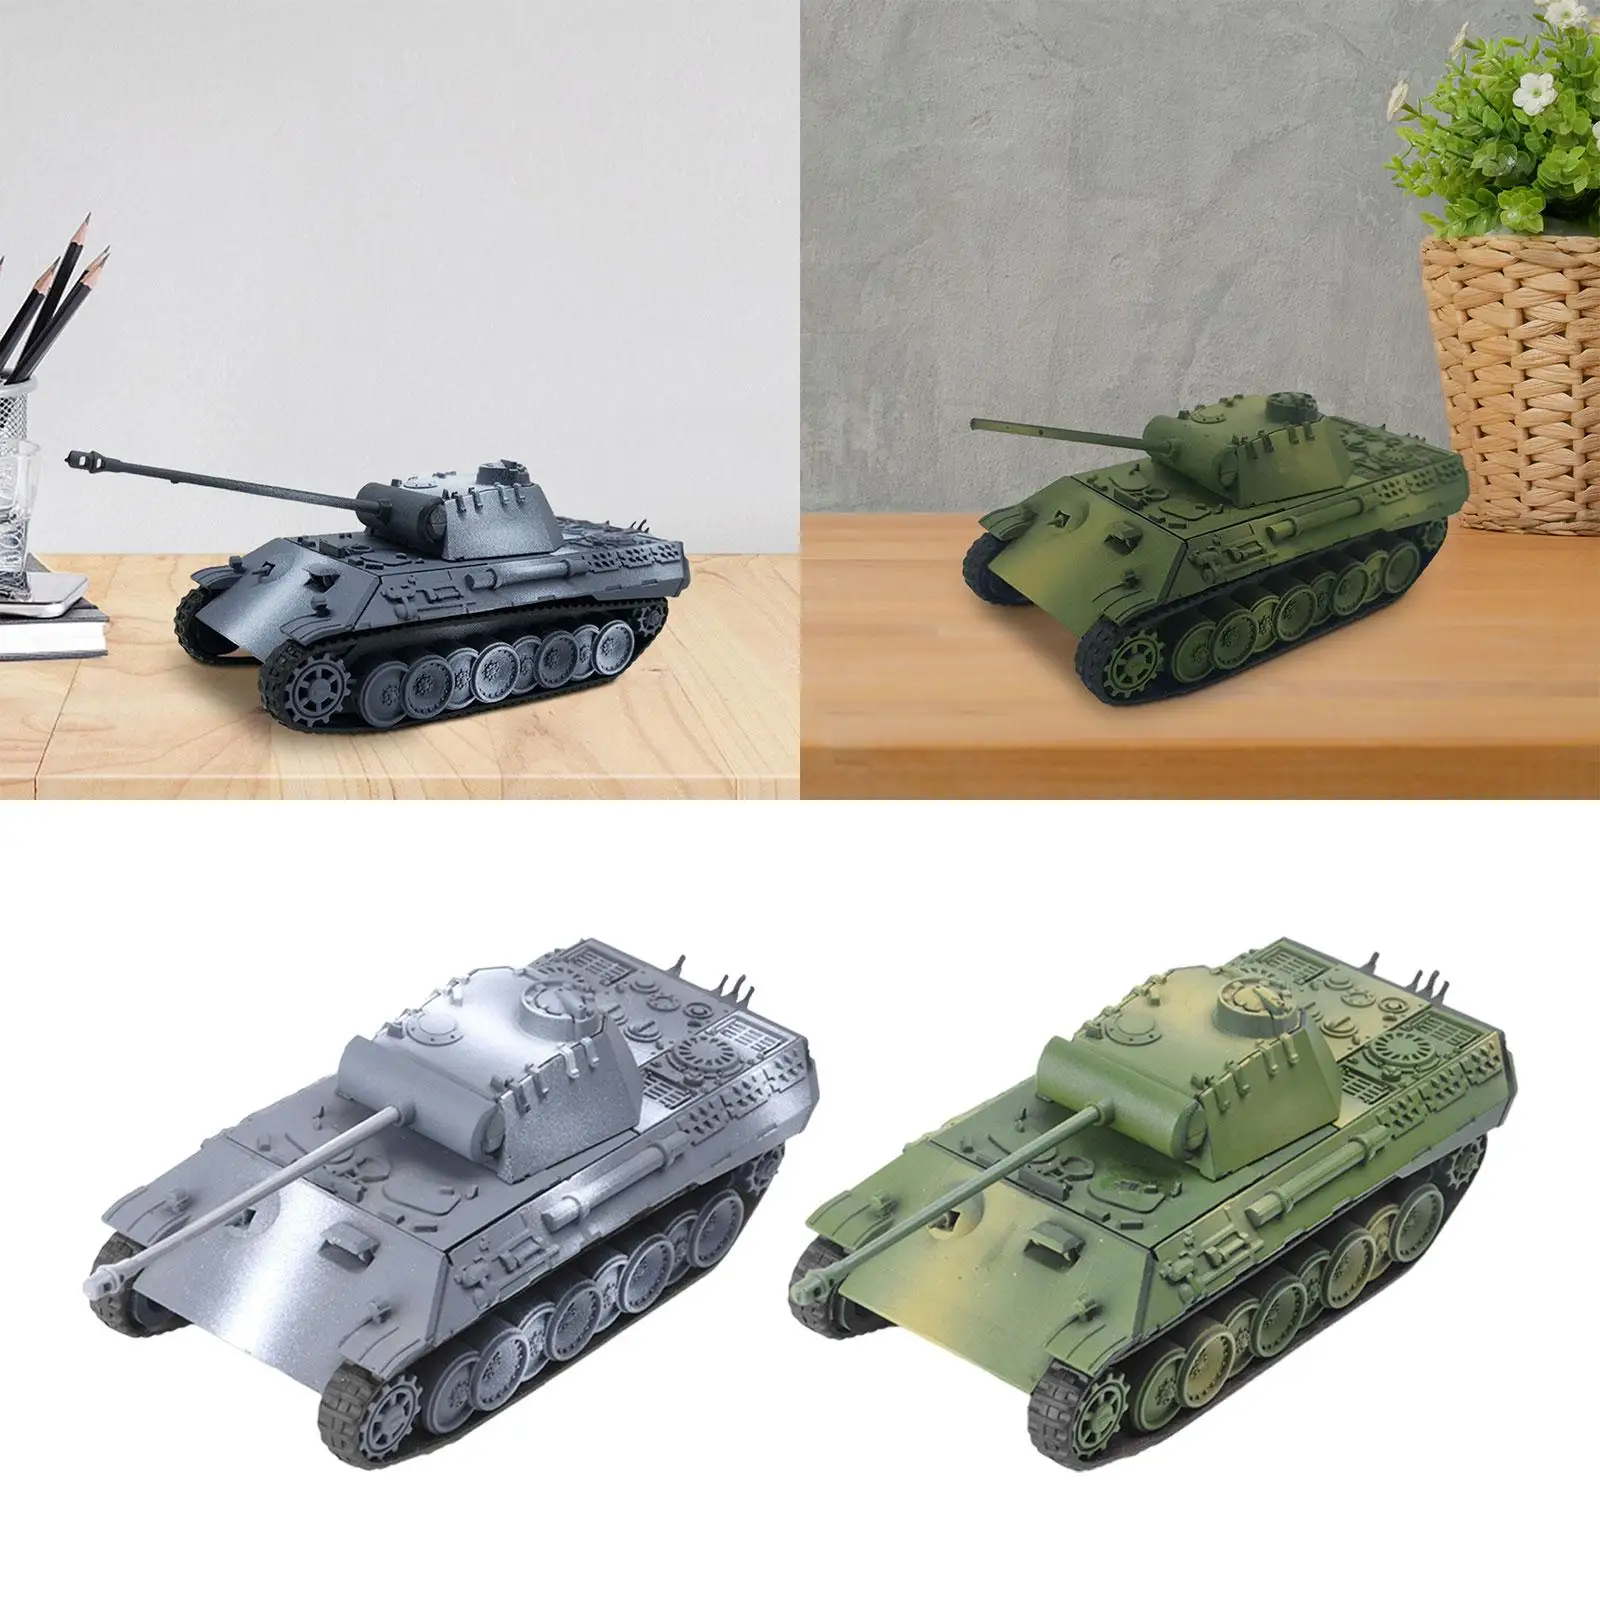 1:72 Scale 4D Tank Model Collectible DIY Assemble Party Favors Miniature Tank Building Kits Vehicle Tank Model Toy for Adults